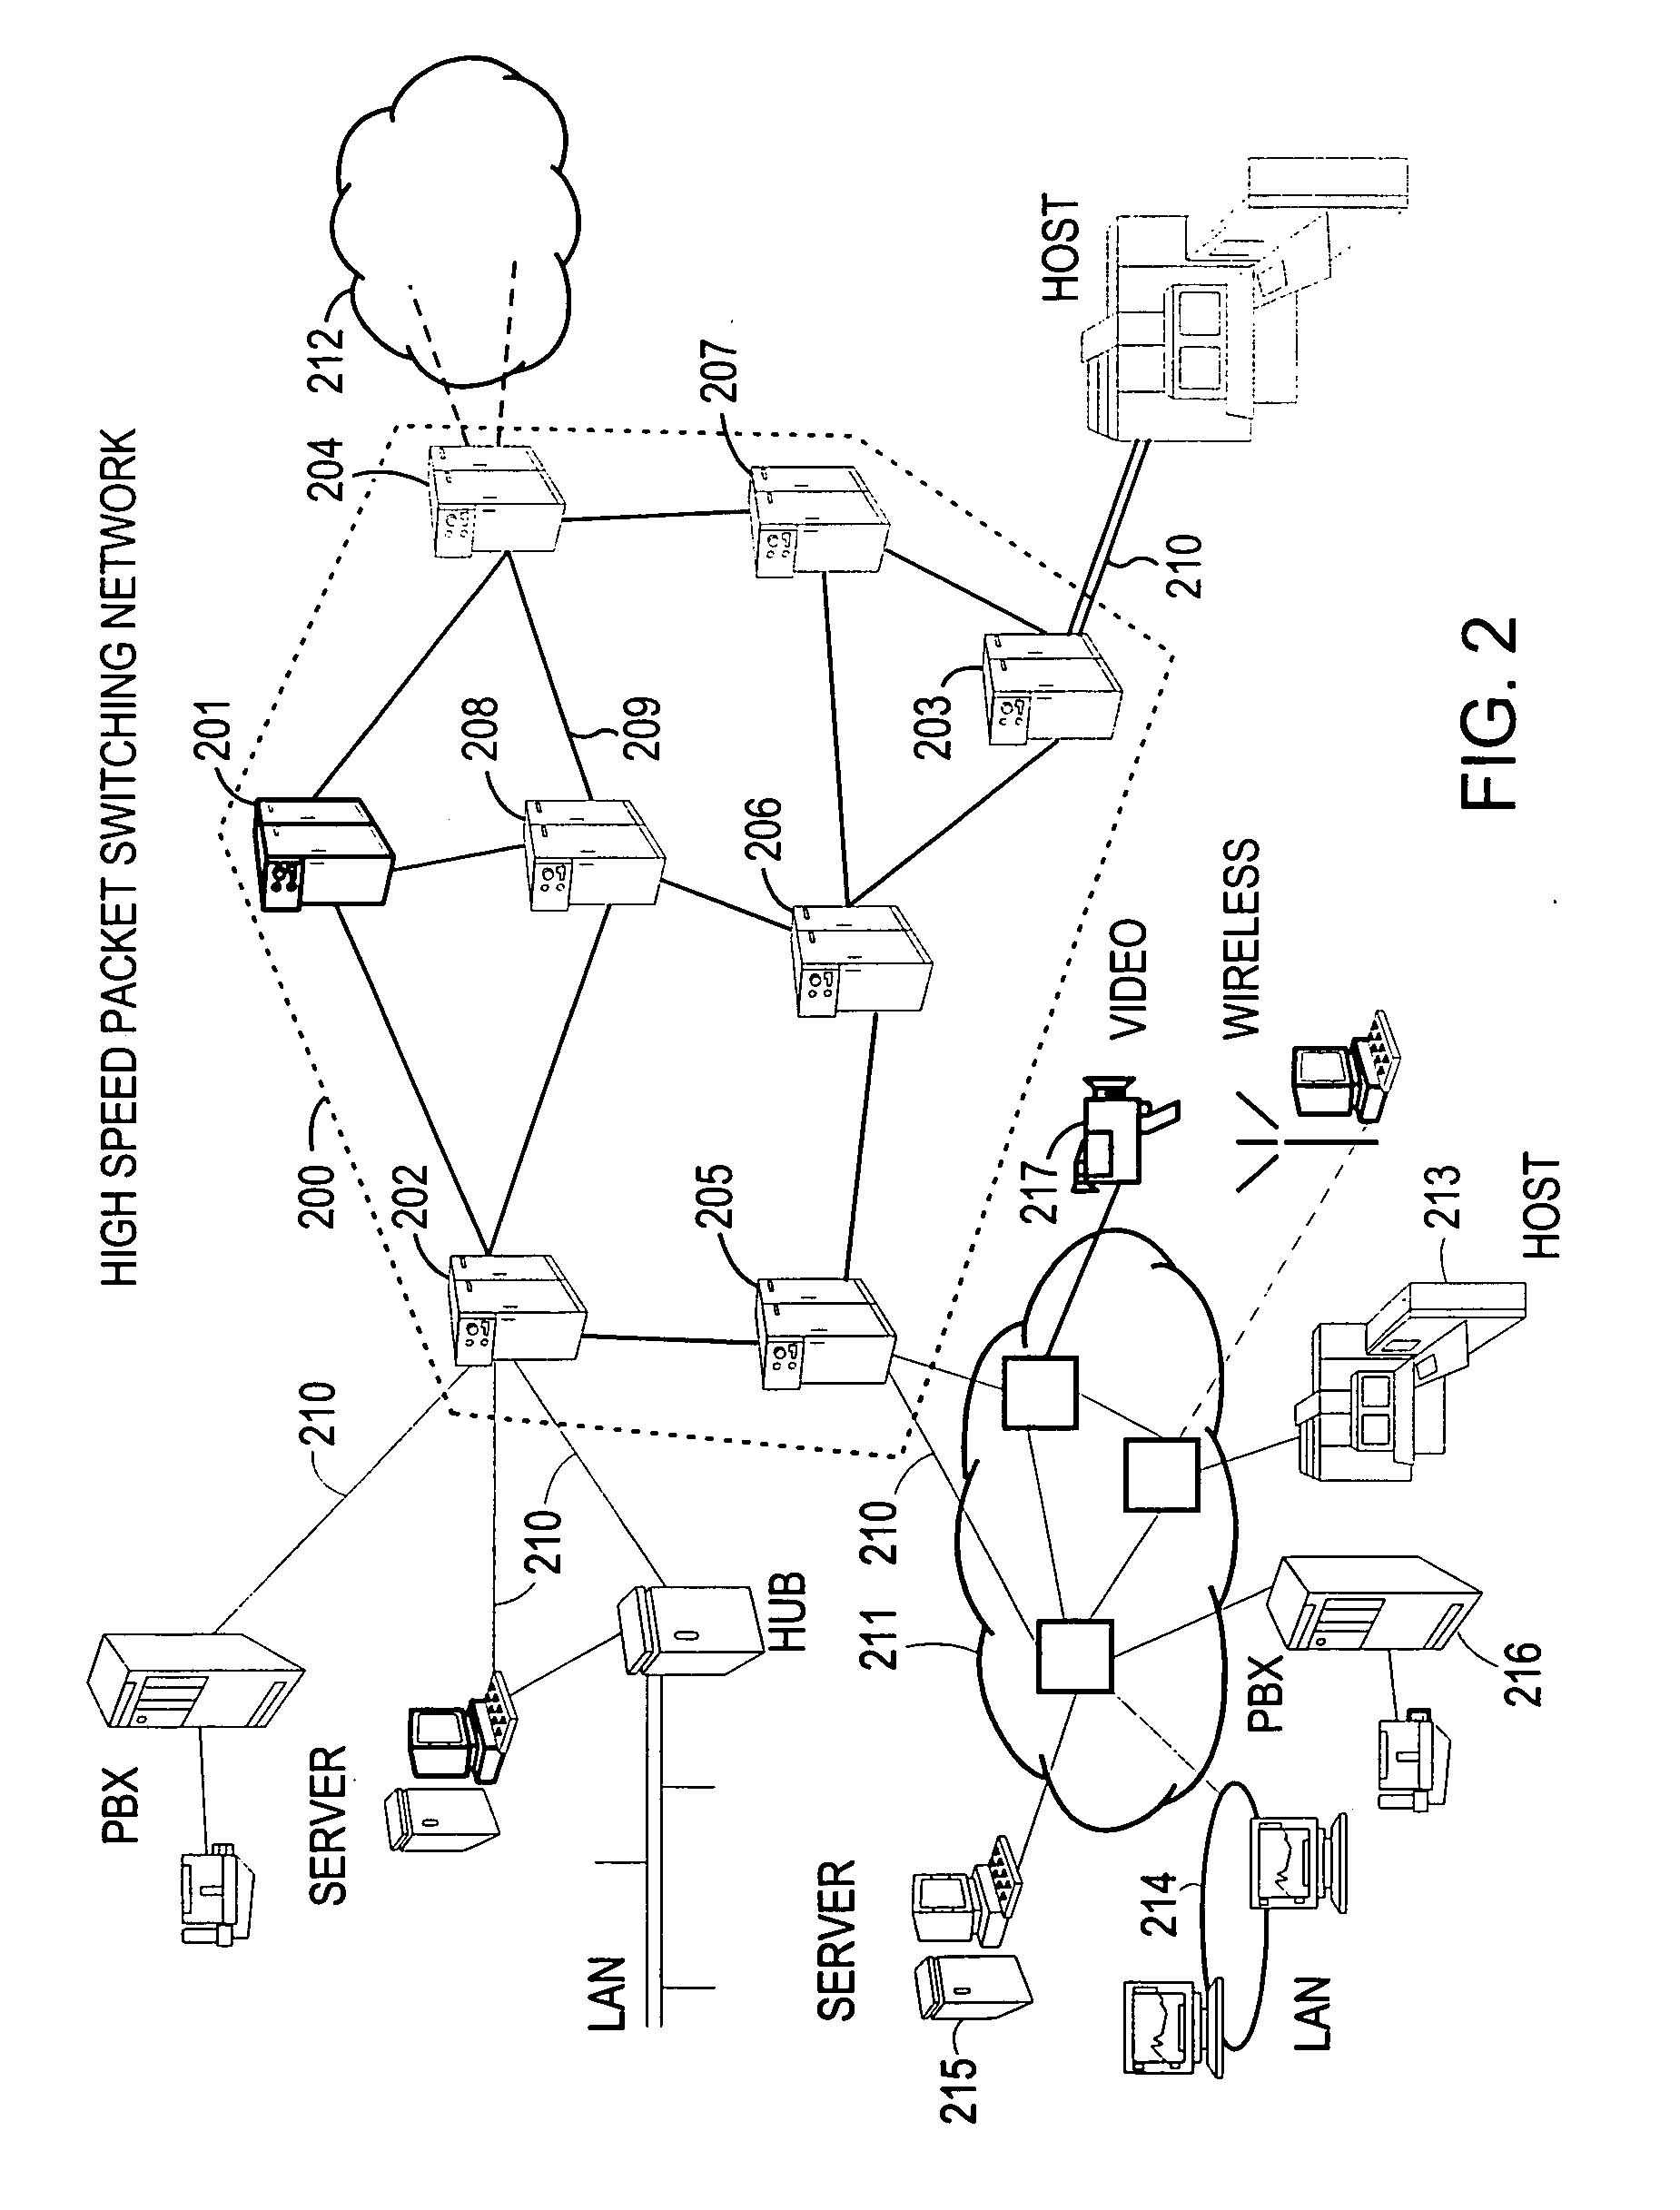 Method and system for minimizing the connection set up time in high speed packet switching networks